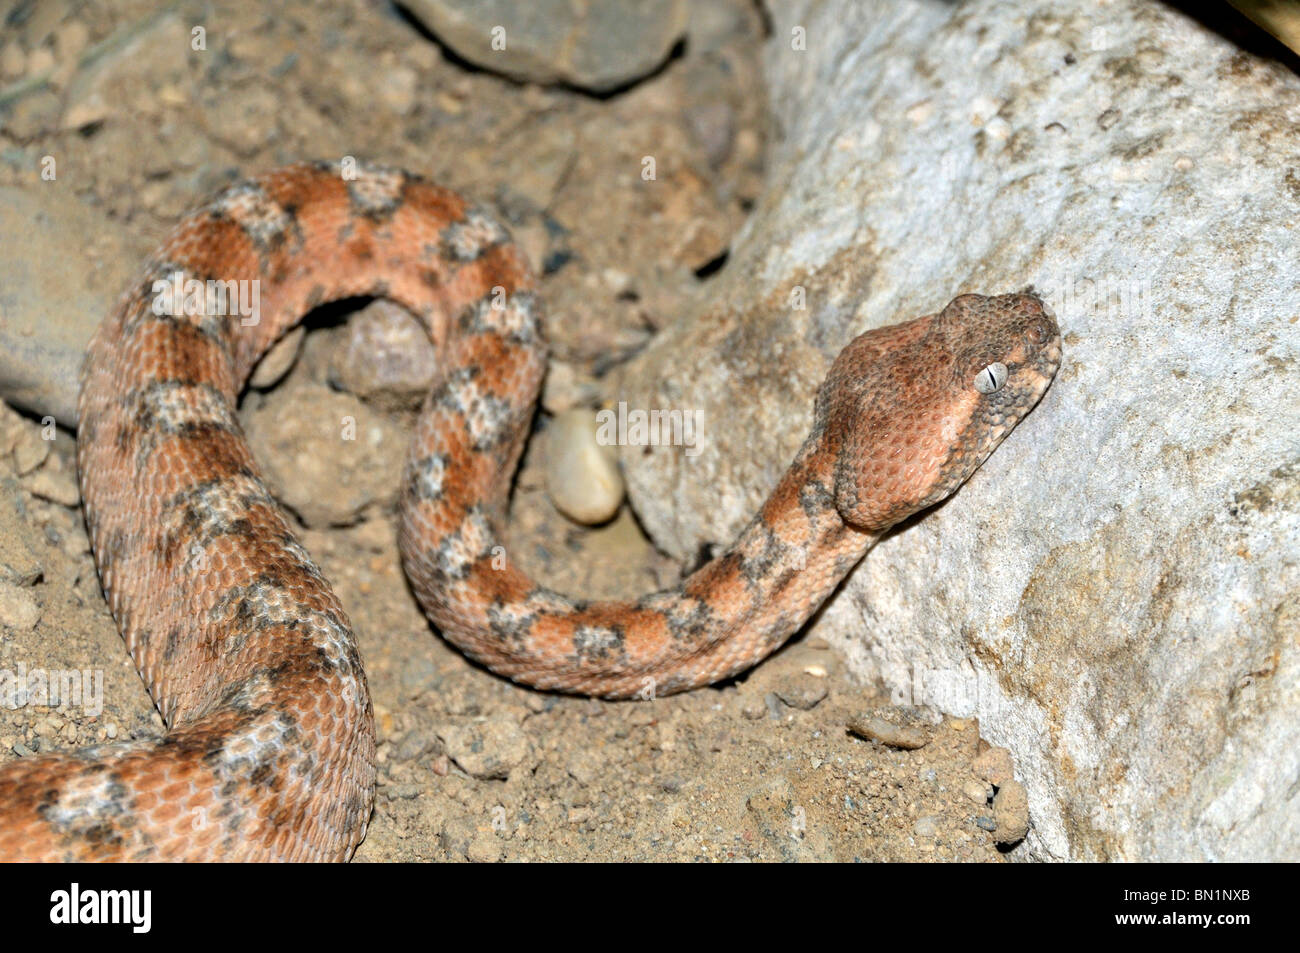 Echis coloratus, Painted saw-scaled viper Stock Photo